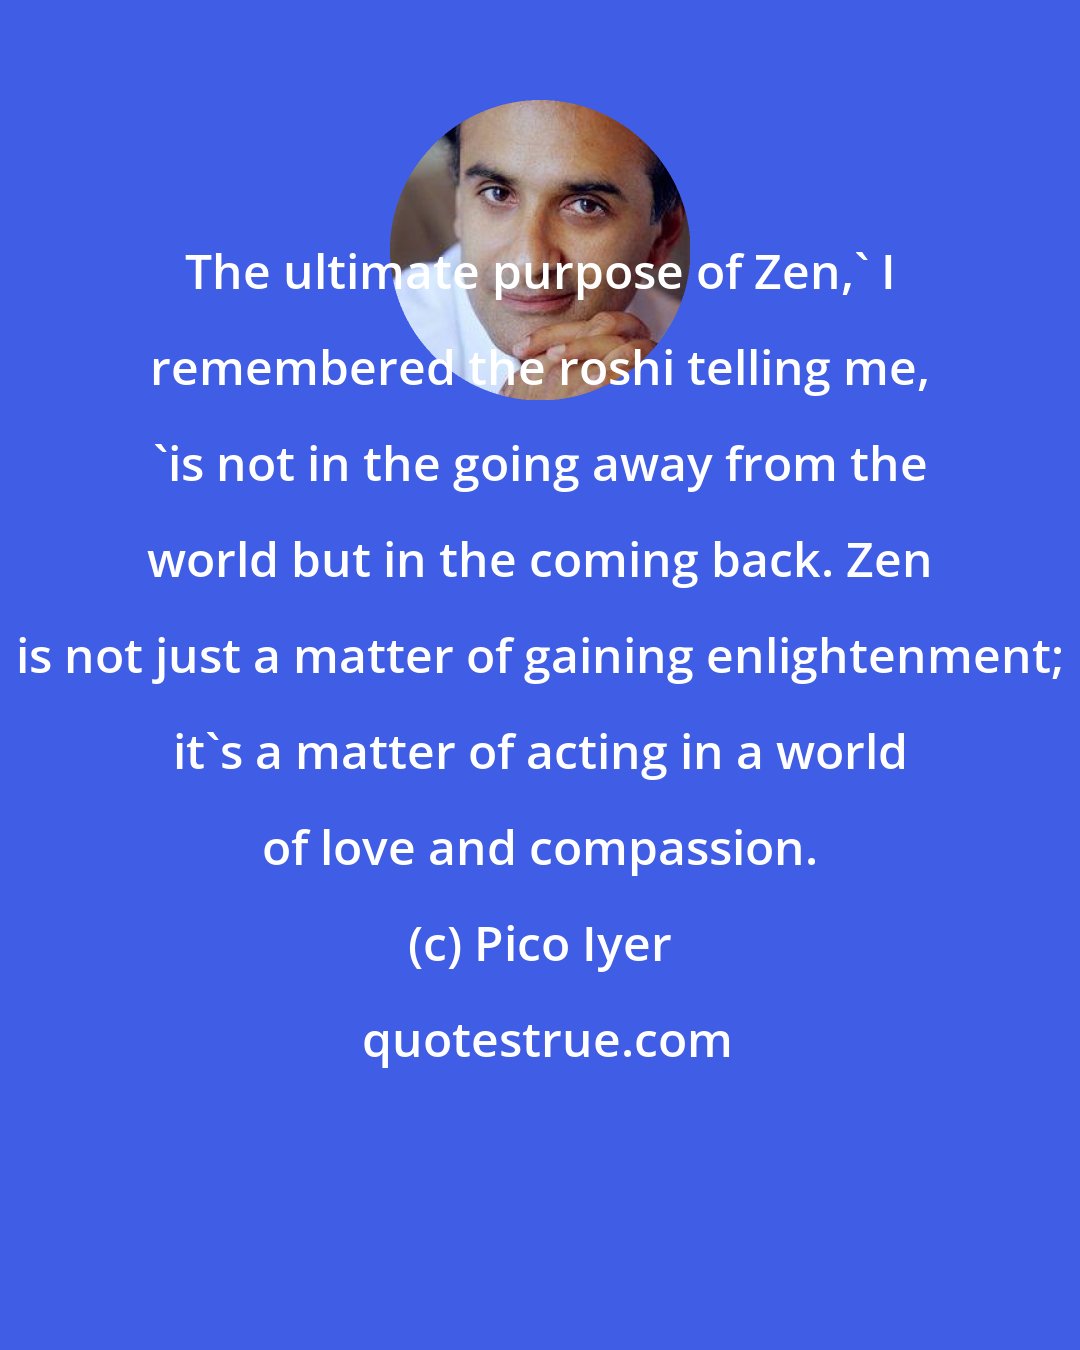 Pico Iyer: The ultimate purpose of Zen,' I remembered the roshi telling me, 'is not in the going away from the world but in the coming back. Zen is not just a matter of gaining enlightenment; it's a matter of acting in a world of love and compassion.